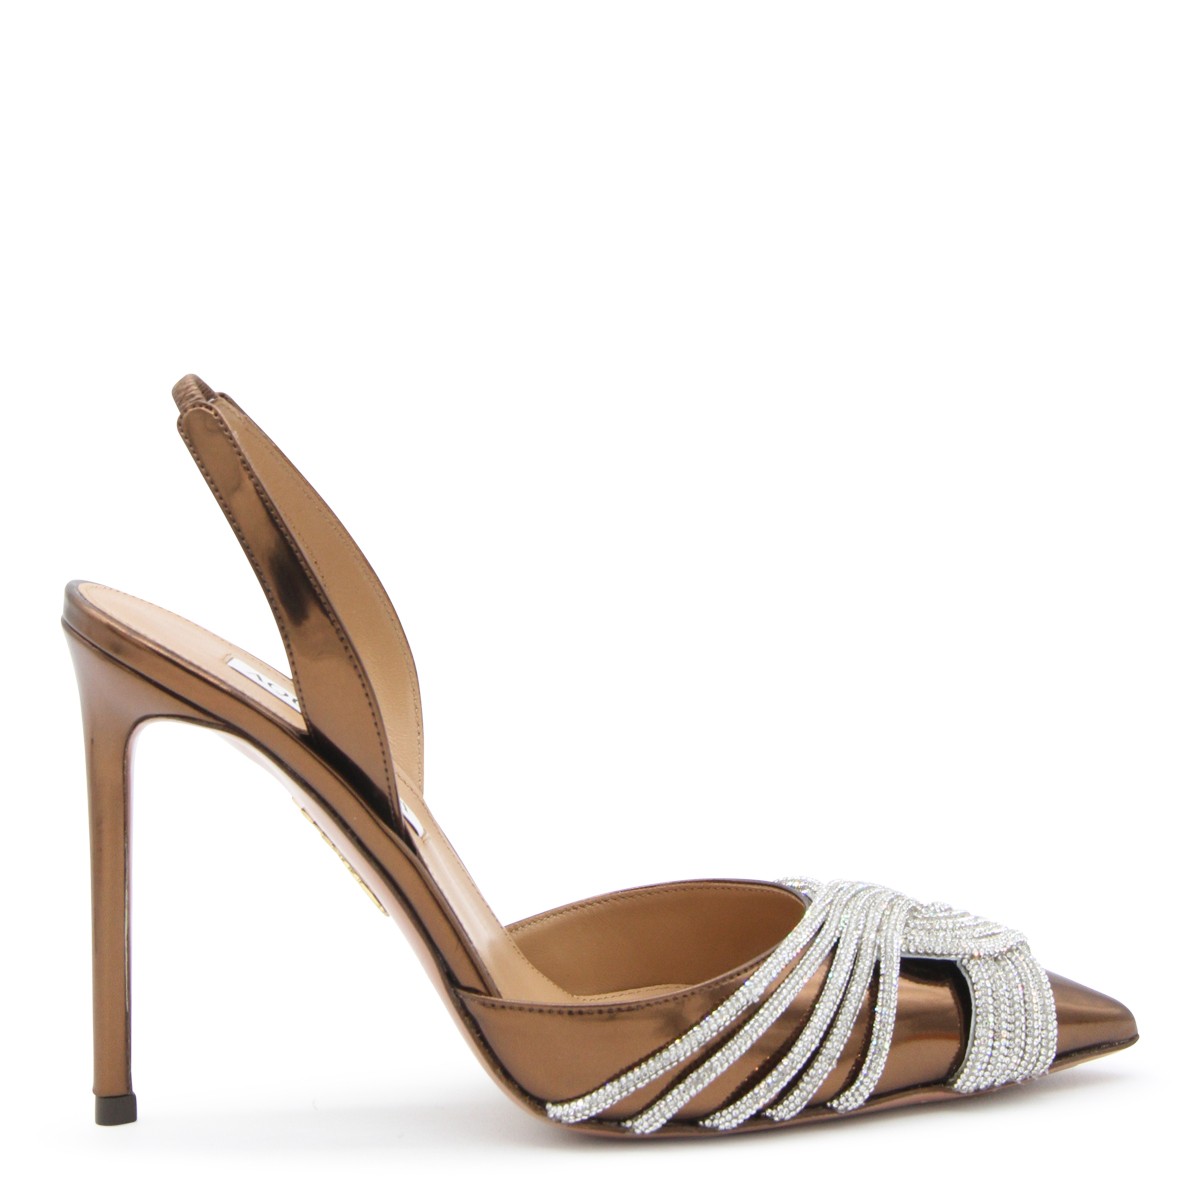 BROWN LEATHER GATSBY PUMPS